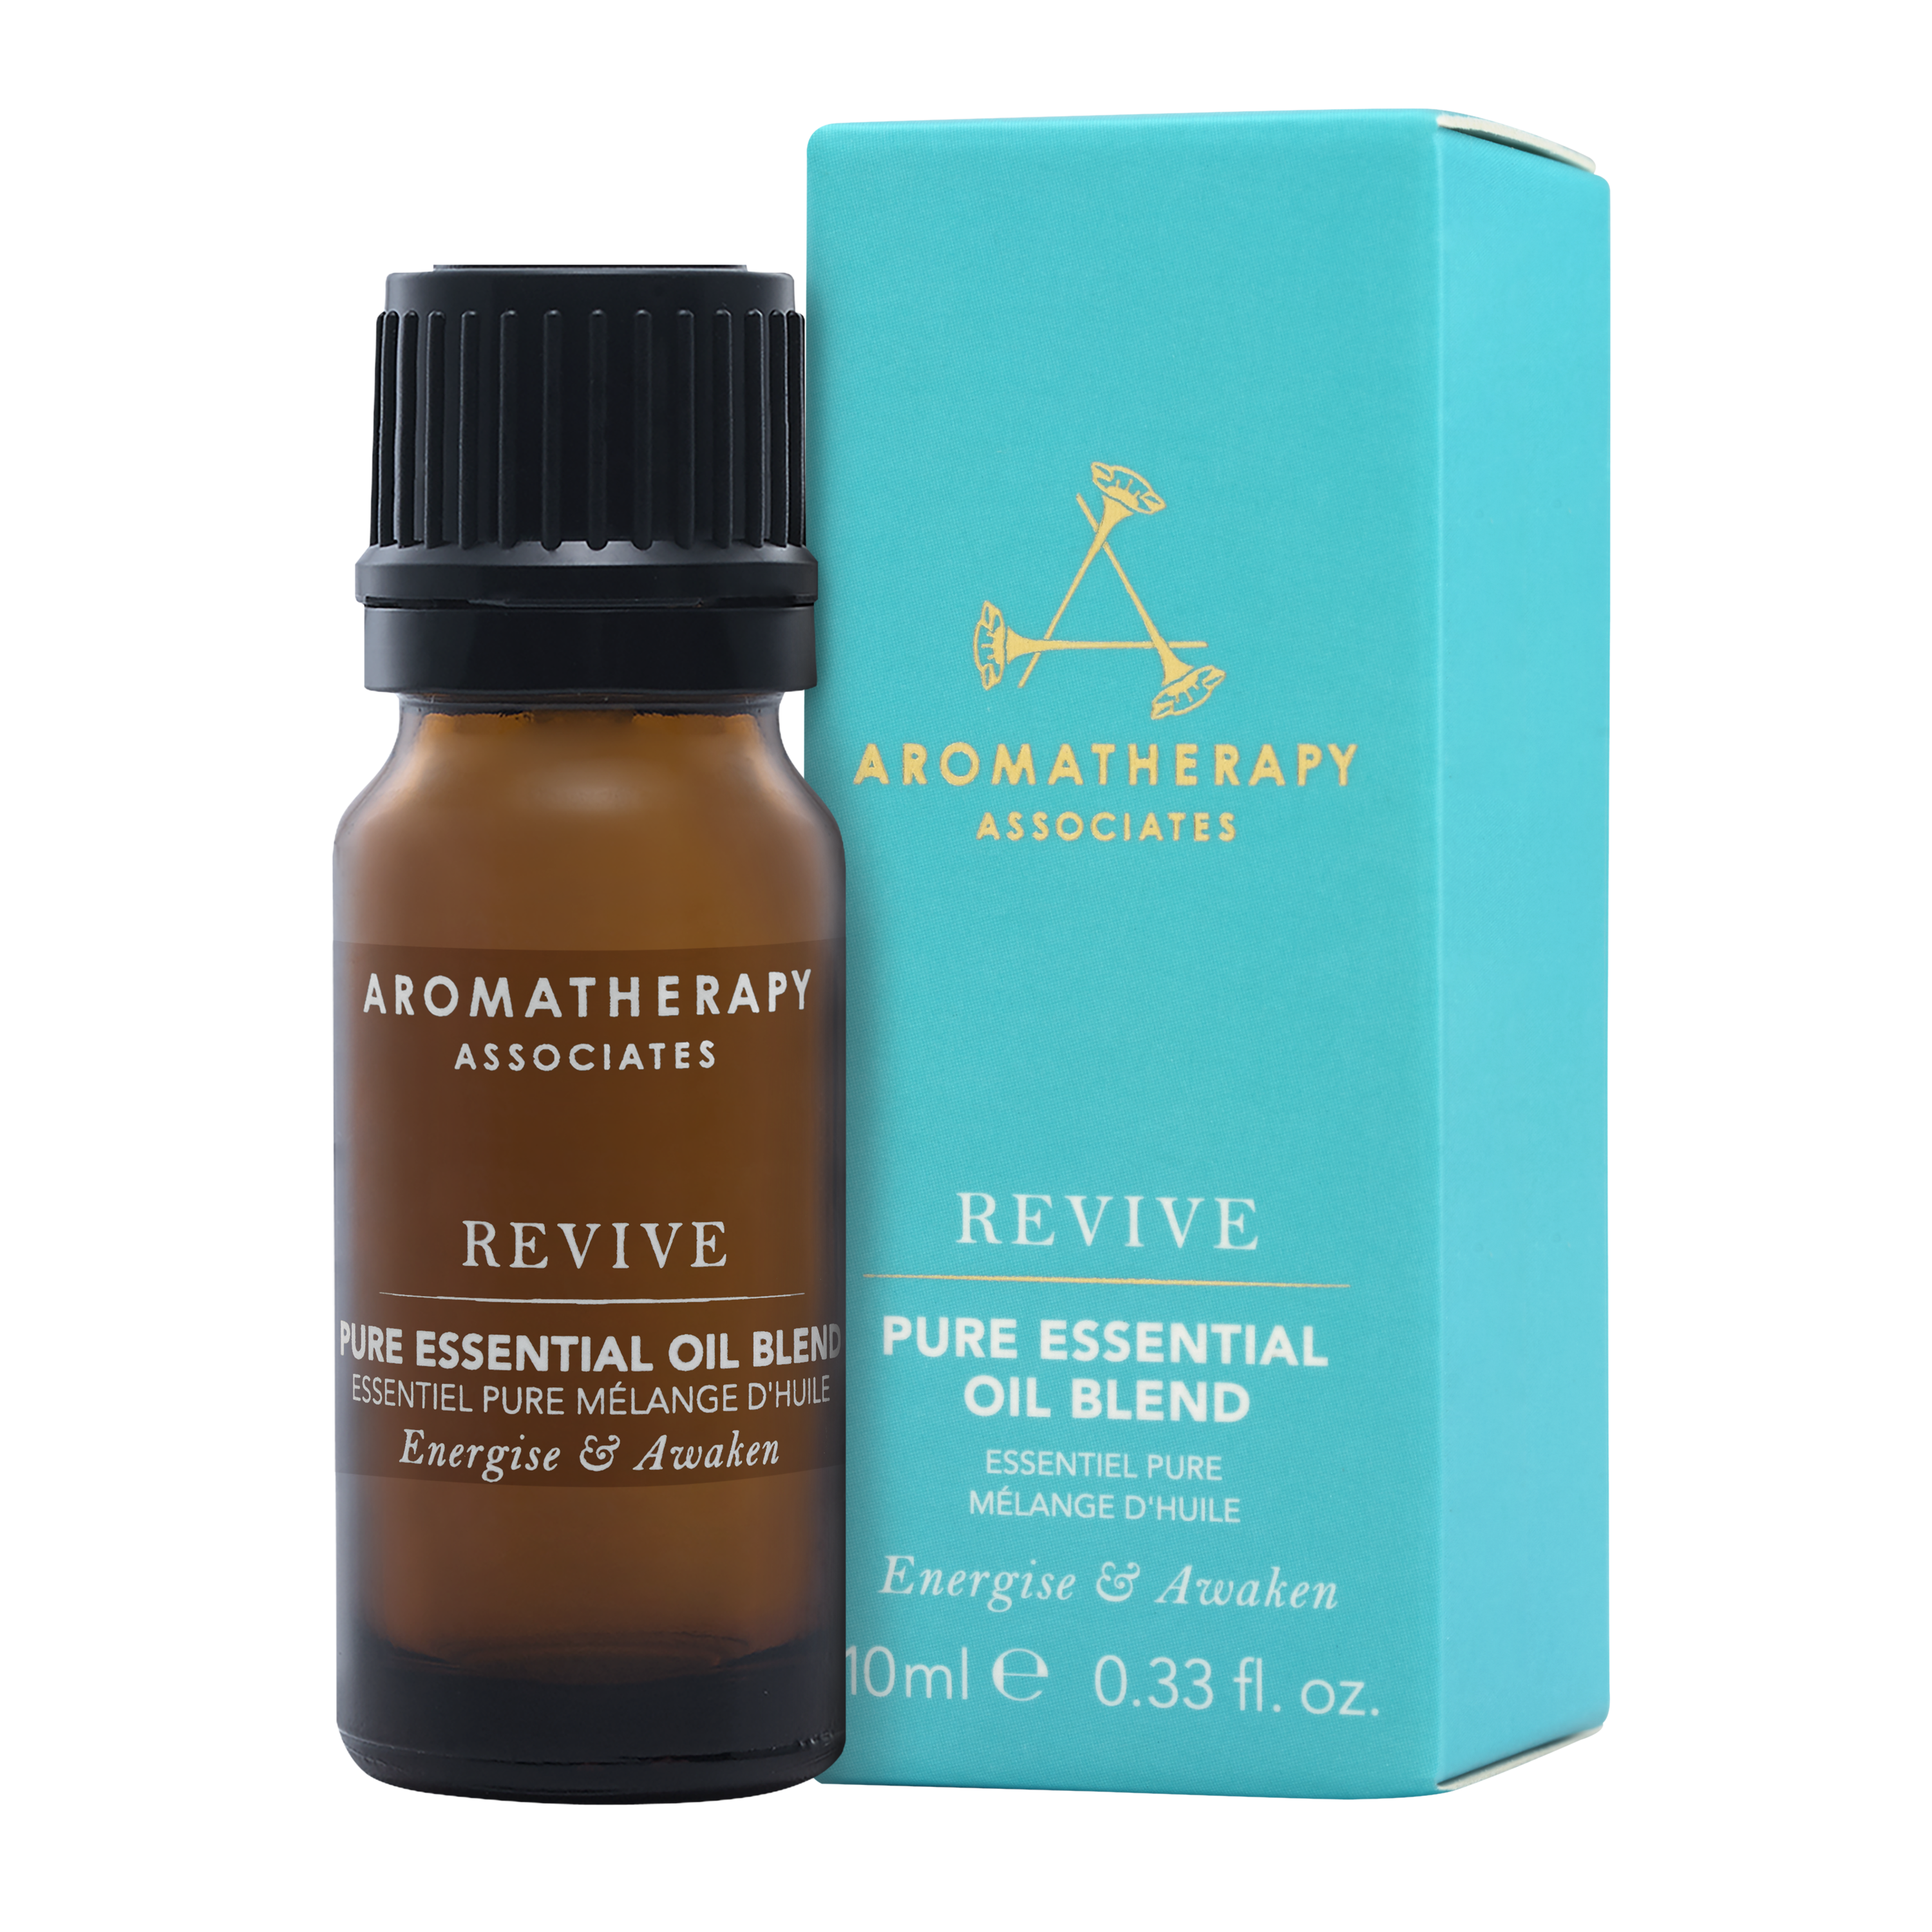  Allergy Relief Essential Oil Blend 30mL by Revive Essential  Oils - 100% Pure Therapeutic Grade, for Diffuser, Humidifier, Massage,  Aromatherapy, Skin & Hair Care : Health & Household